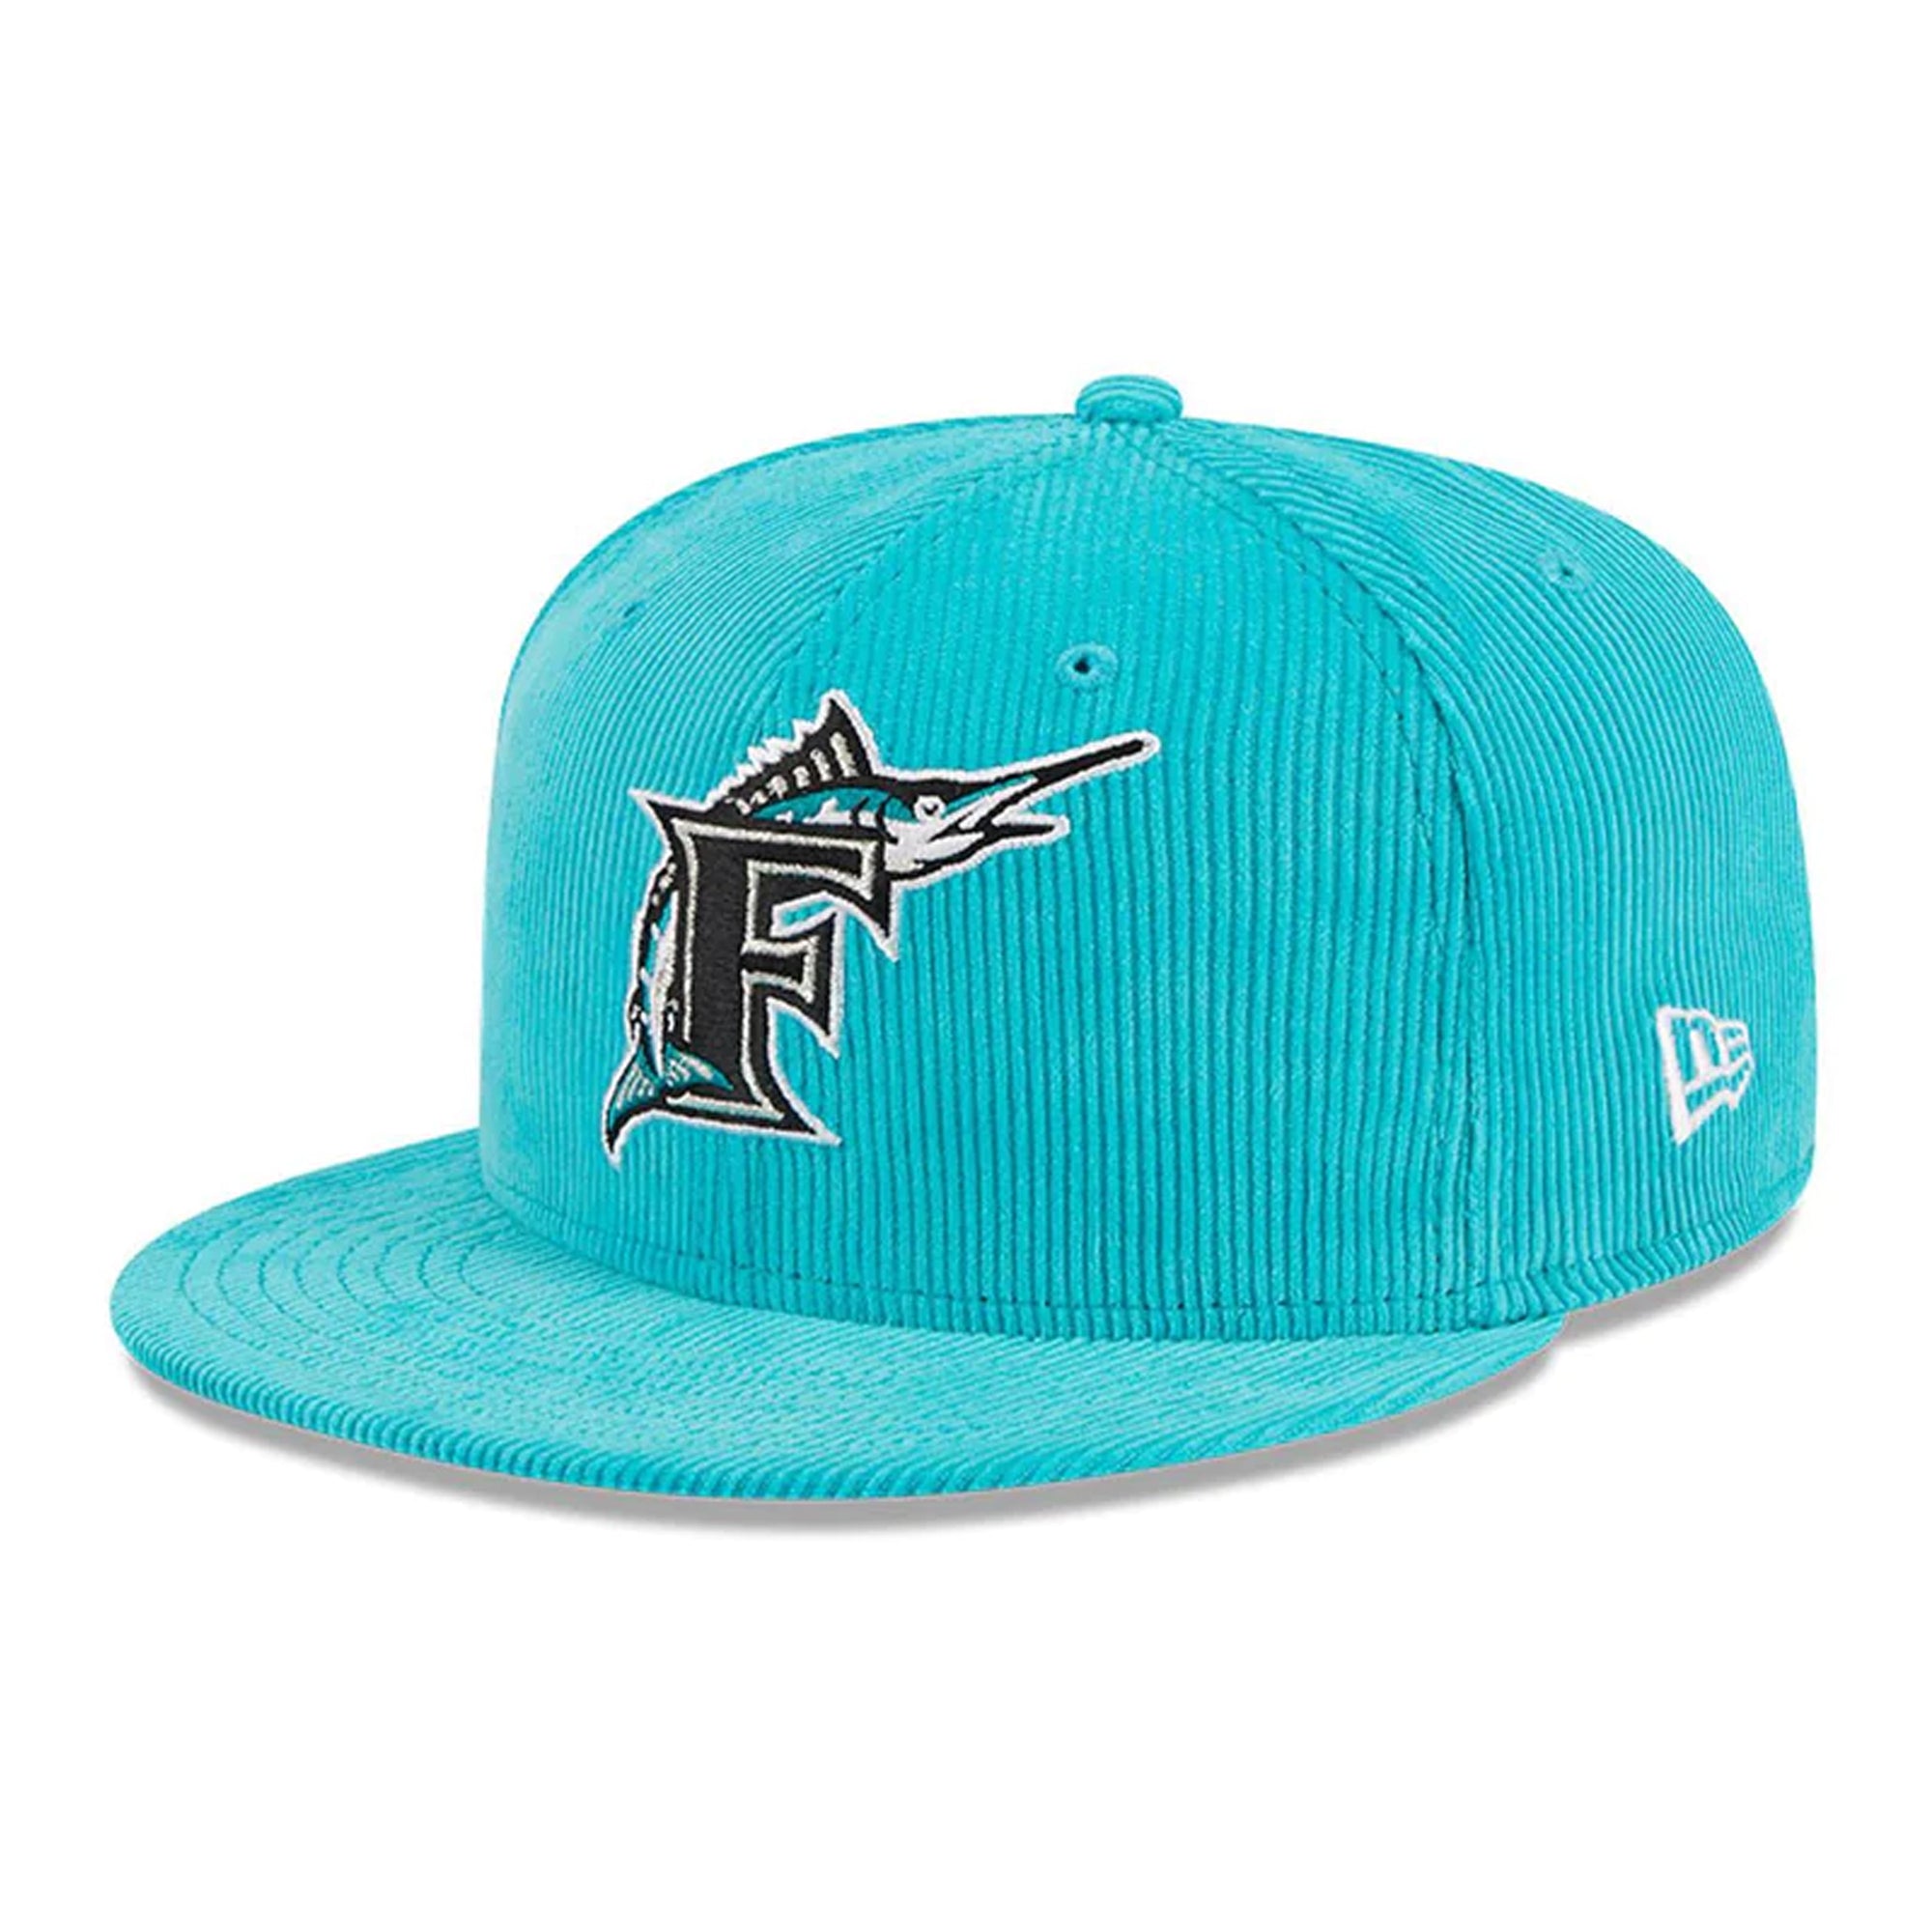 Official New Era Vintage Cord Miami Marlins 59FIFTY Fitted Cap